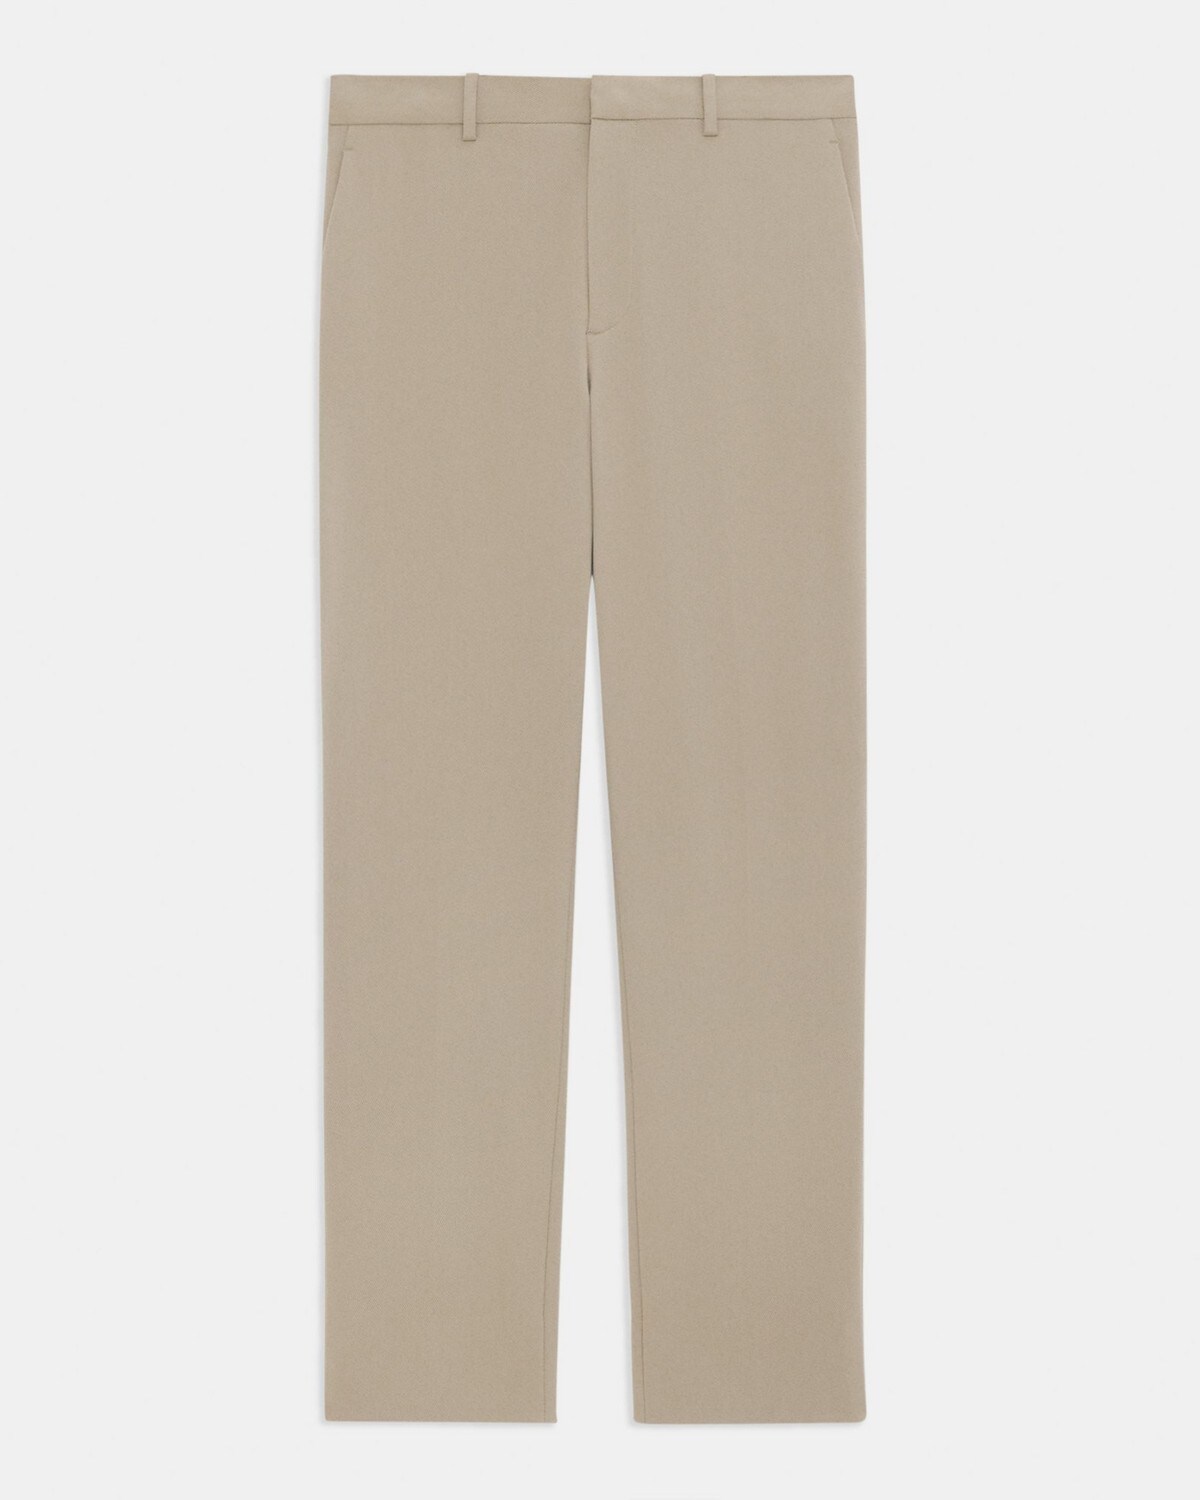 Mayer Pant in Neoteric Twill